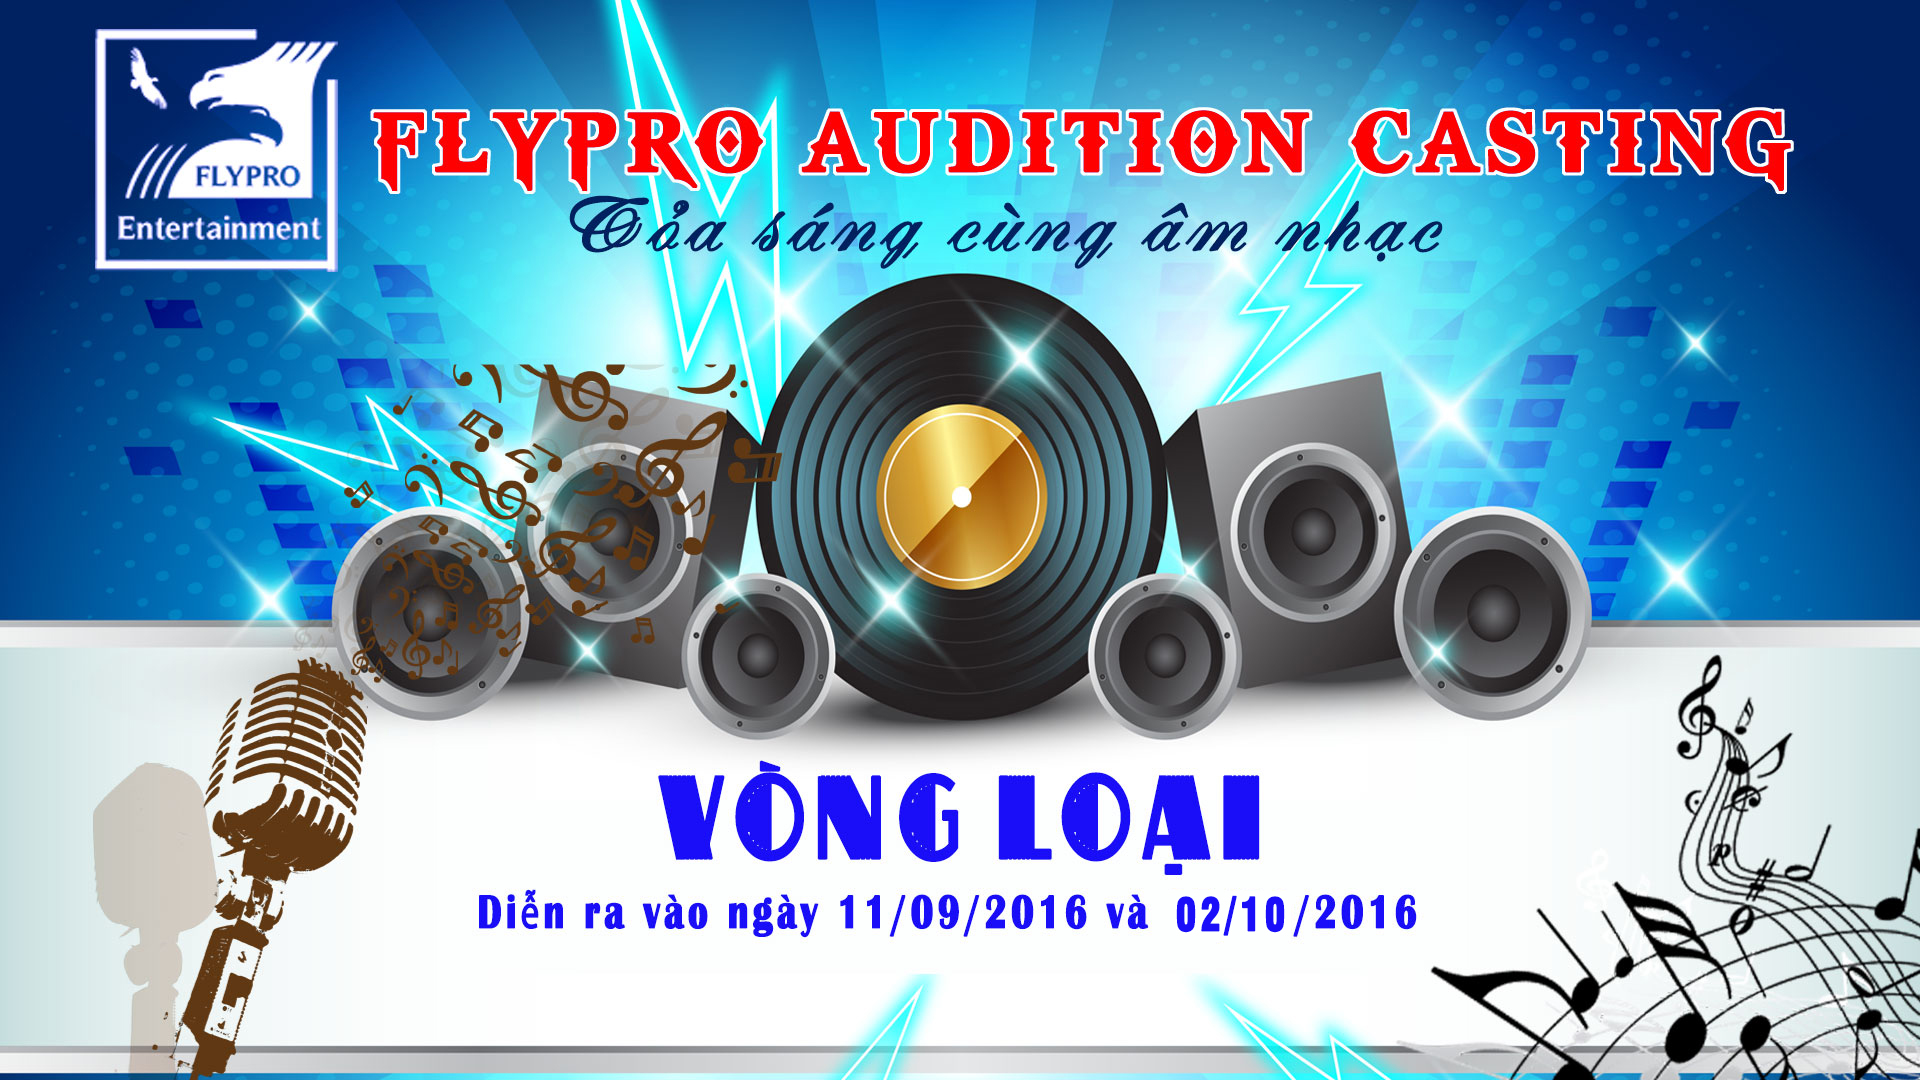 Flypro Audition Casting 2016